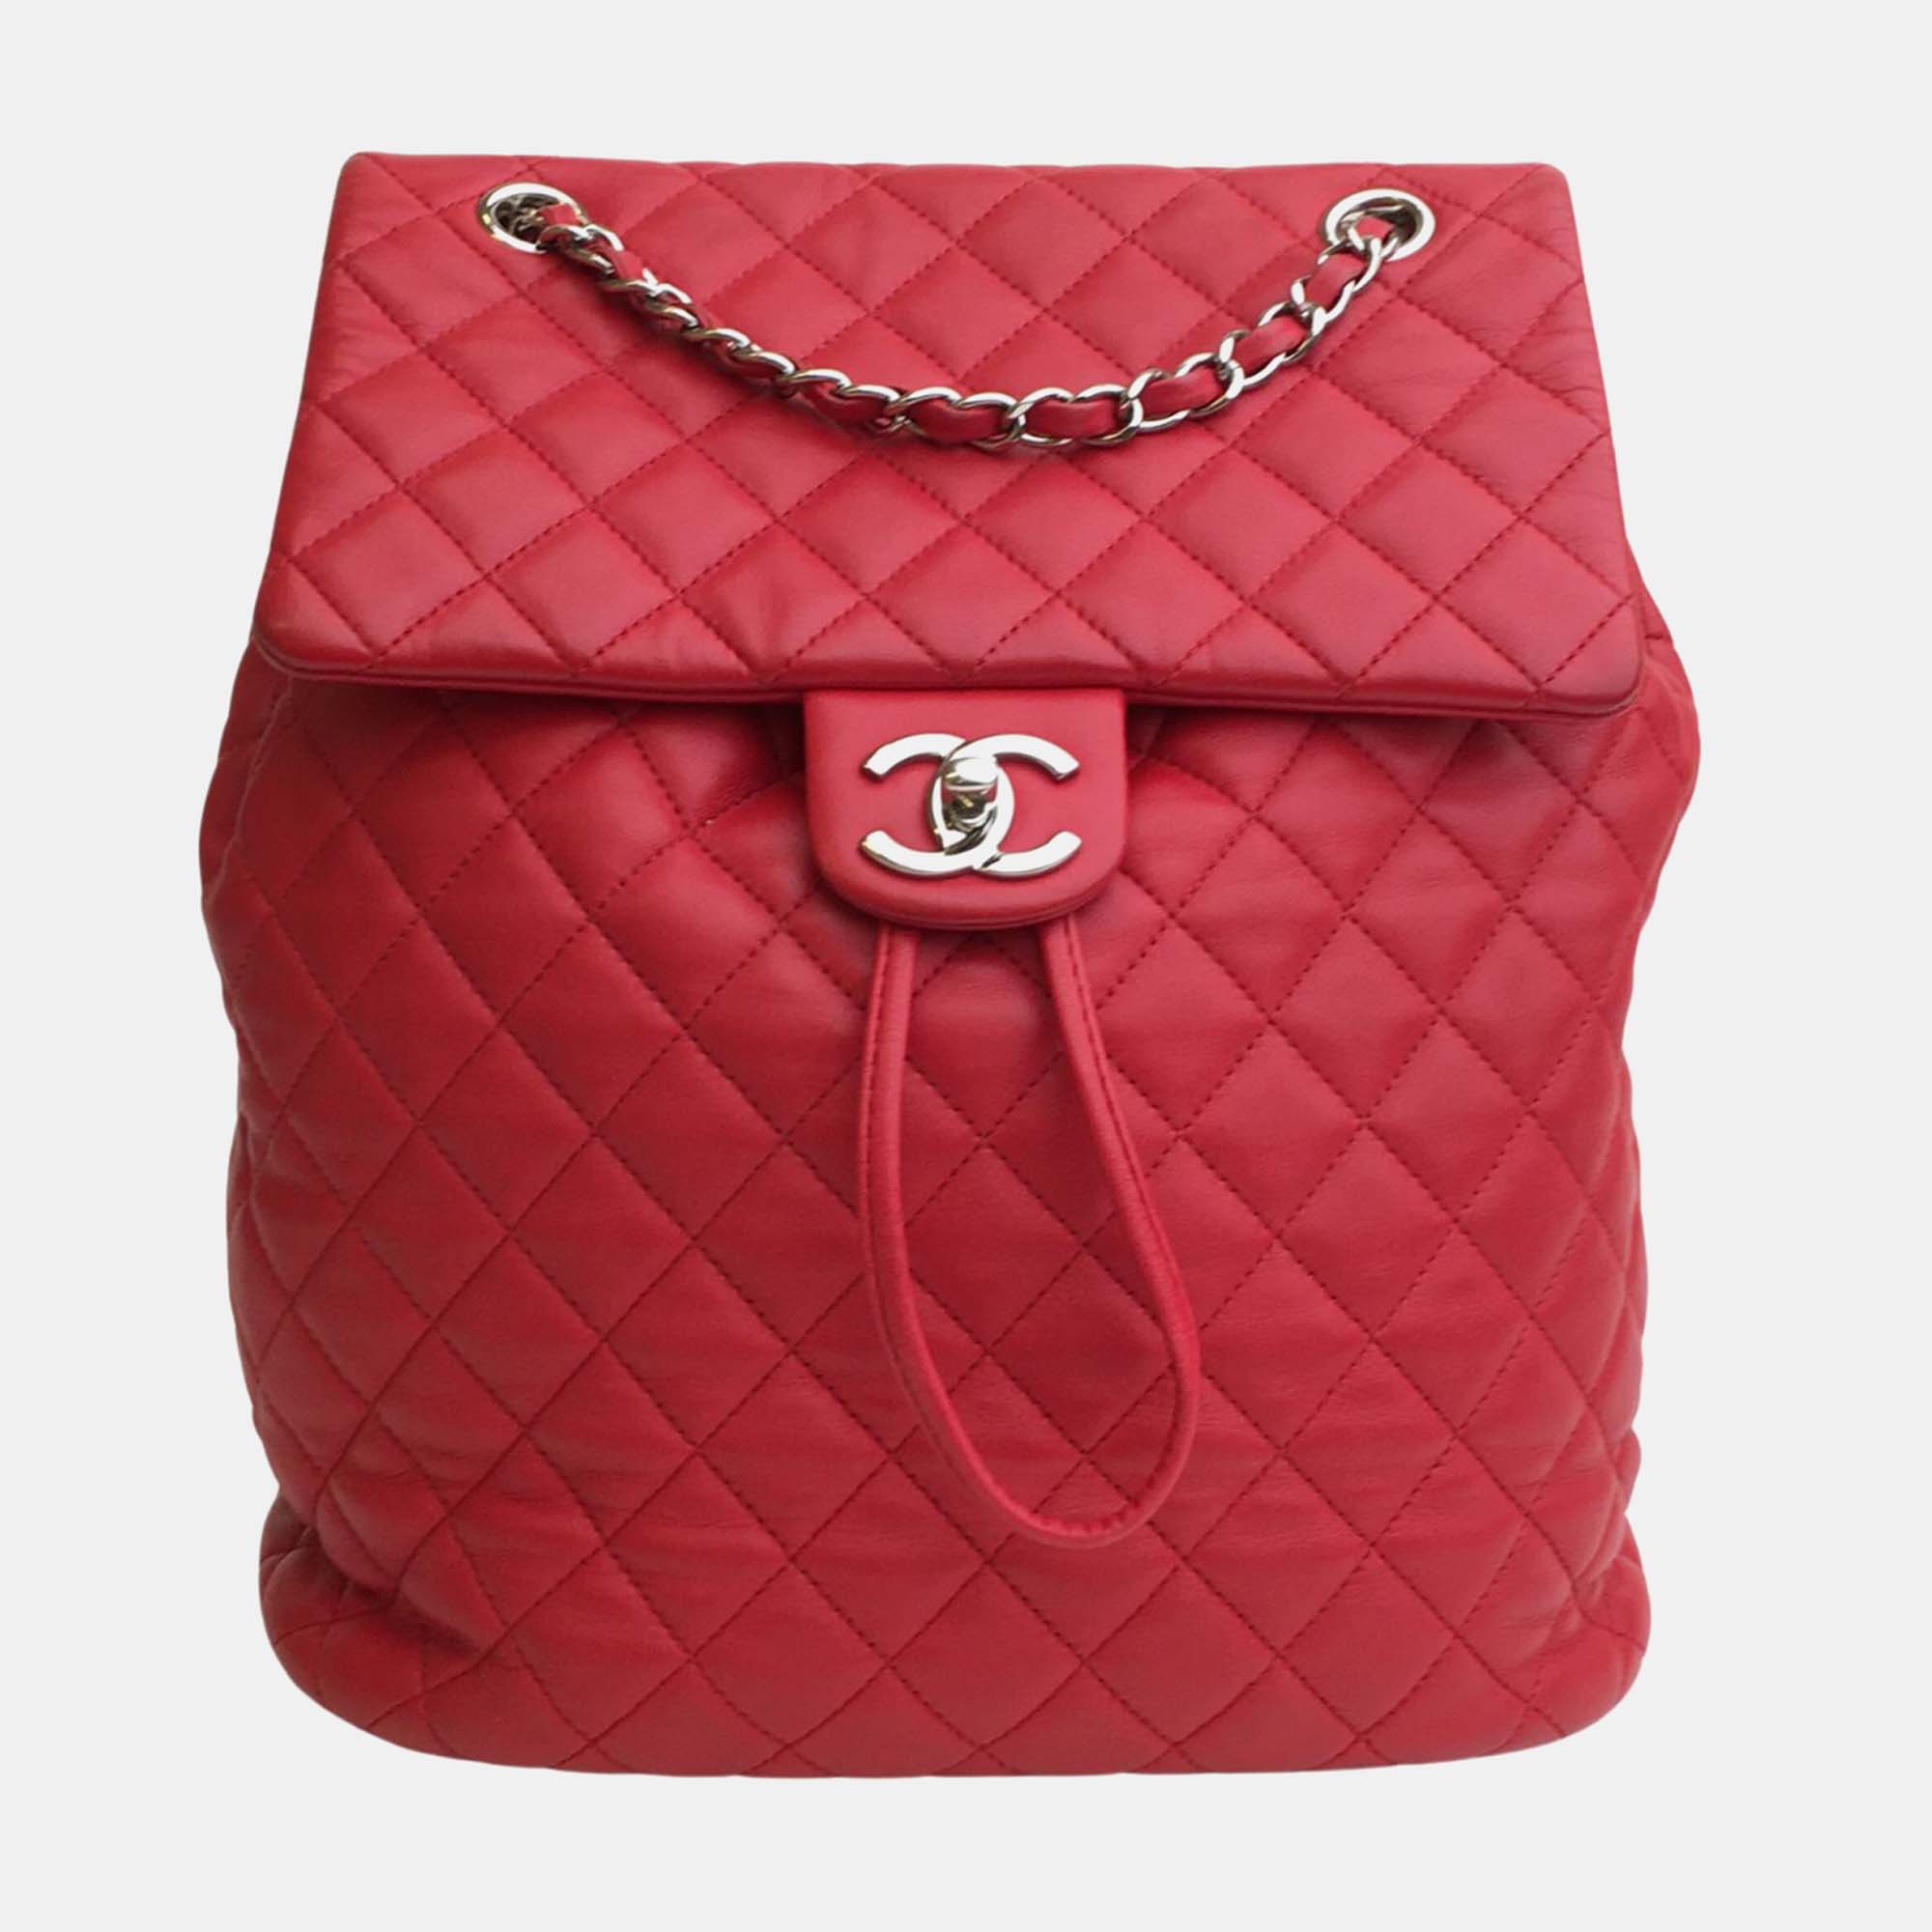 Chanel red leather small urban spirit backpacks